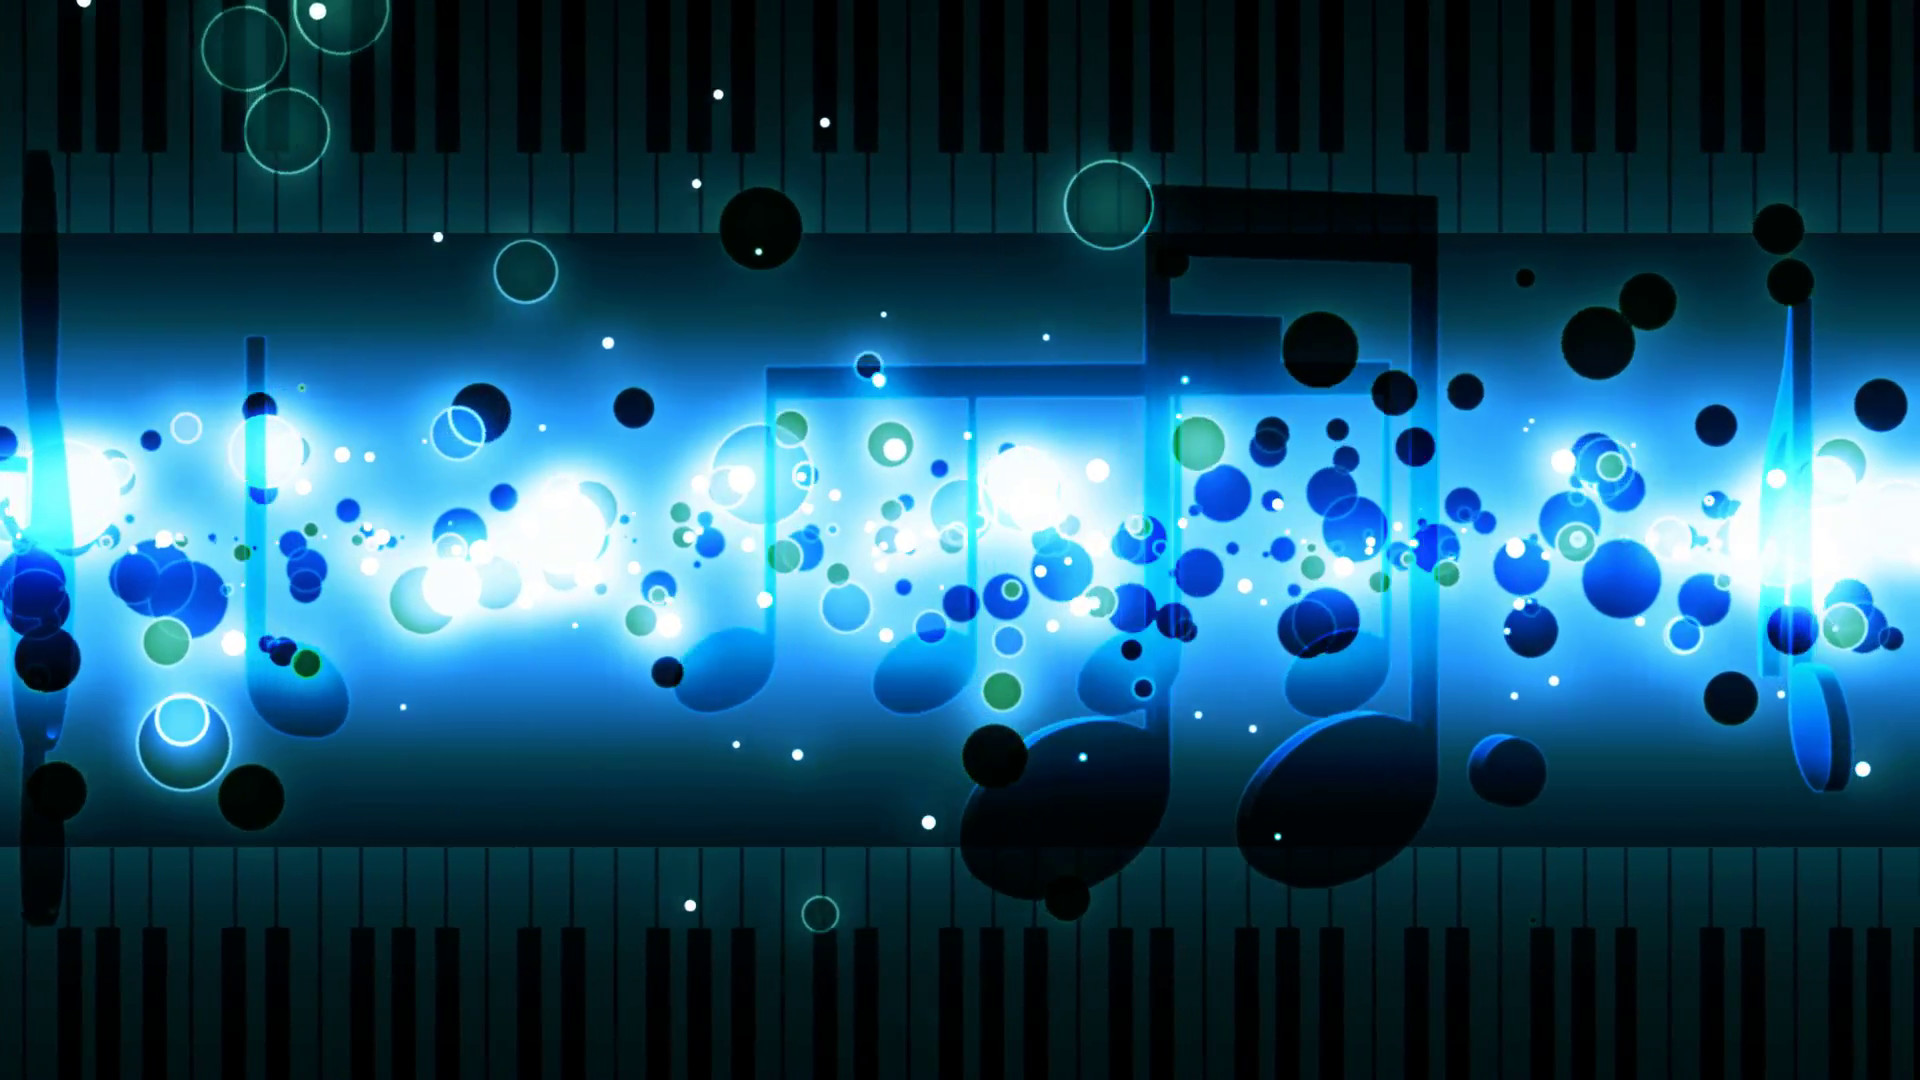 1920x1080 Rainbow Music Background Vector Art | Getty Images